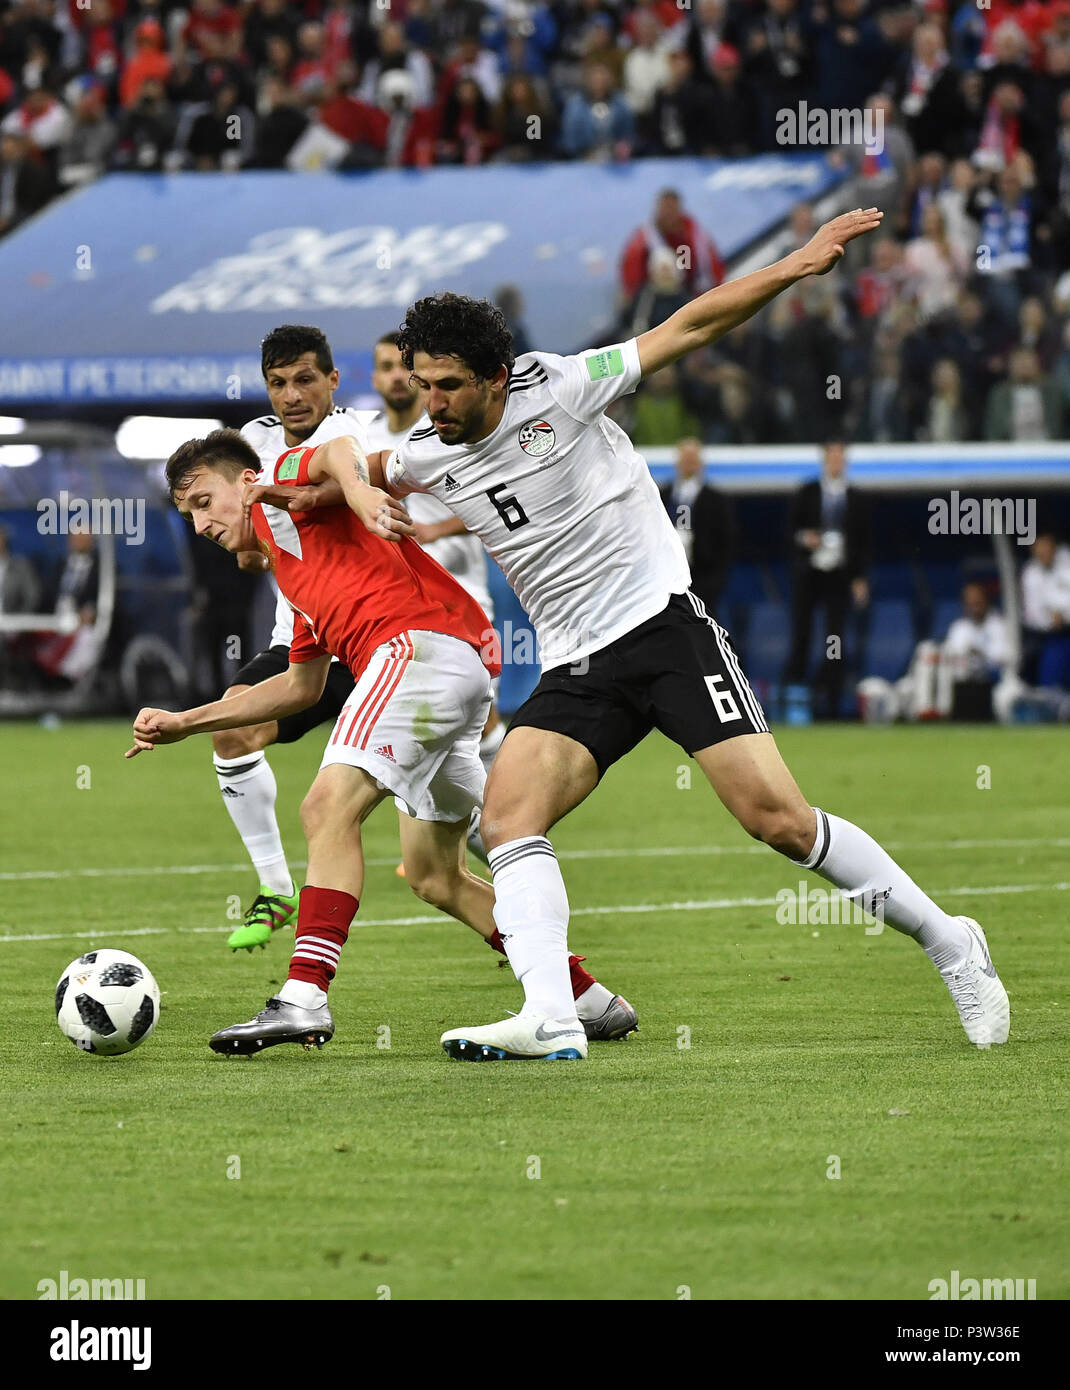 Saint Petersburg, Russia. 19th June, 2018. Aleksandr Golovin (L) of Russia vies with Ahmed Hegazy of Egypt during a Group A match between Russia and Egypt at the 2018 FIFA World Cup in Saint Petersburg, Russia, June 19, 2018. Russia won 3-1. Credit: Chen Yichen/Xinhua/Alamy Live News Stock Photo